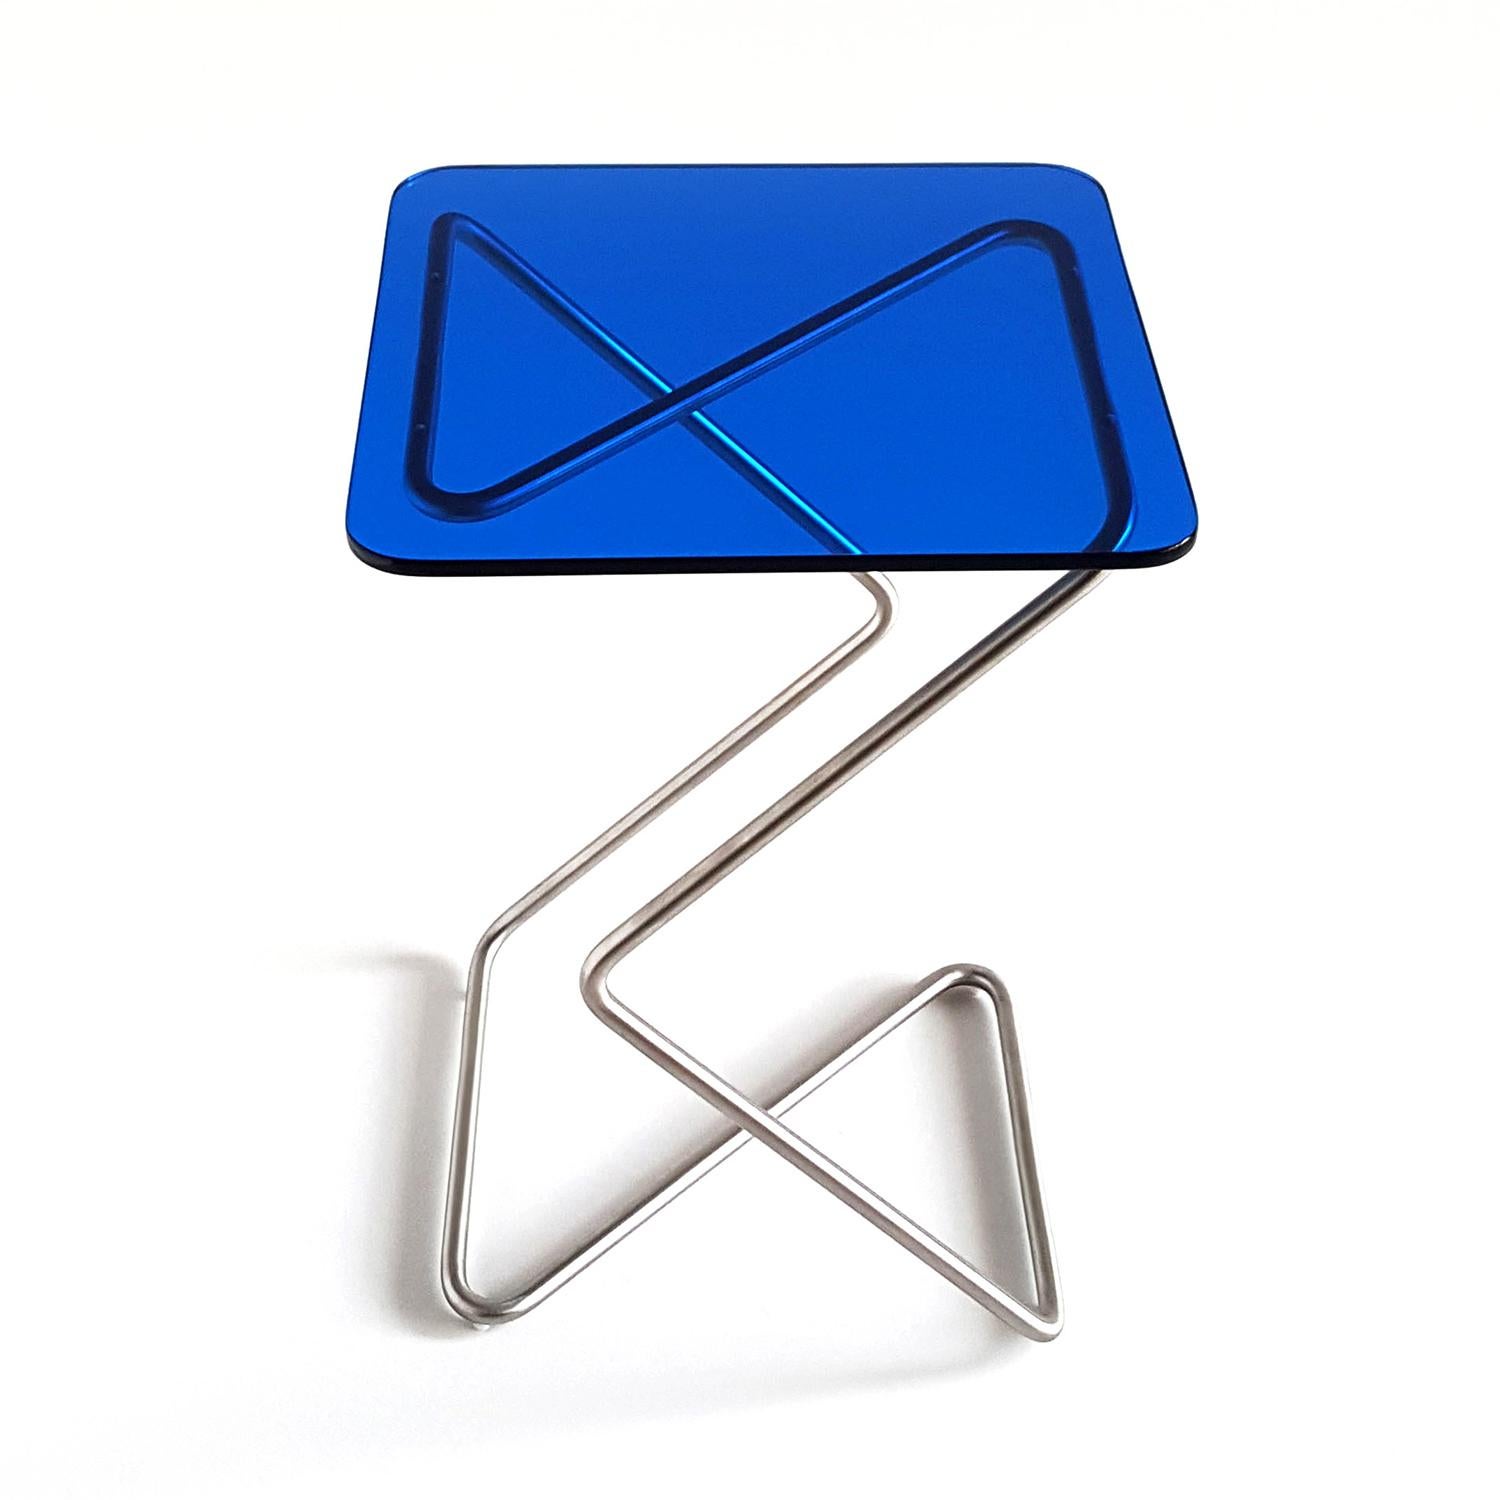 The square side table by Rita Kettaneh
Dimensions: The base: Brushed stainless steel 
 optionally plated with copper or brass
 The top: acrylic
Materials: H 46 x W 33 x D 33 cm
Weight: 3.75 Kg

Colors and finishes:
Stainless finish: Burnt